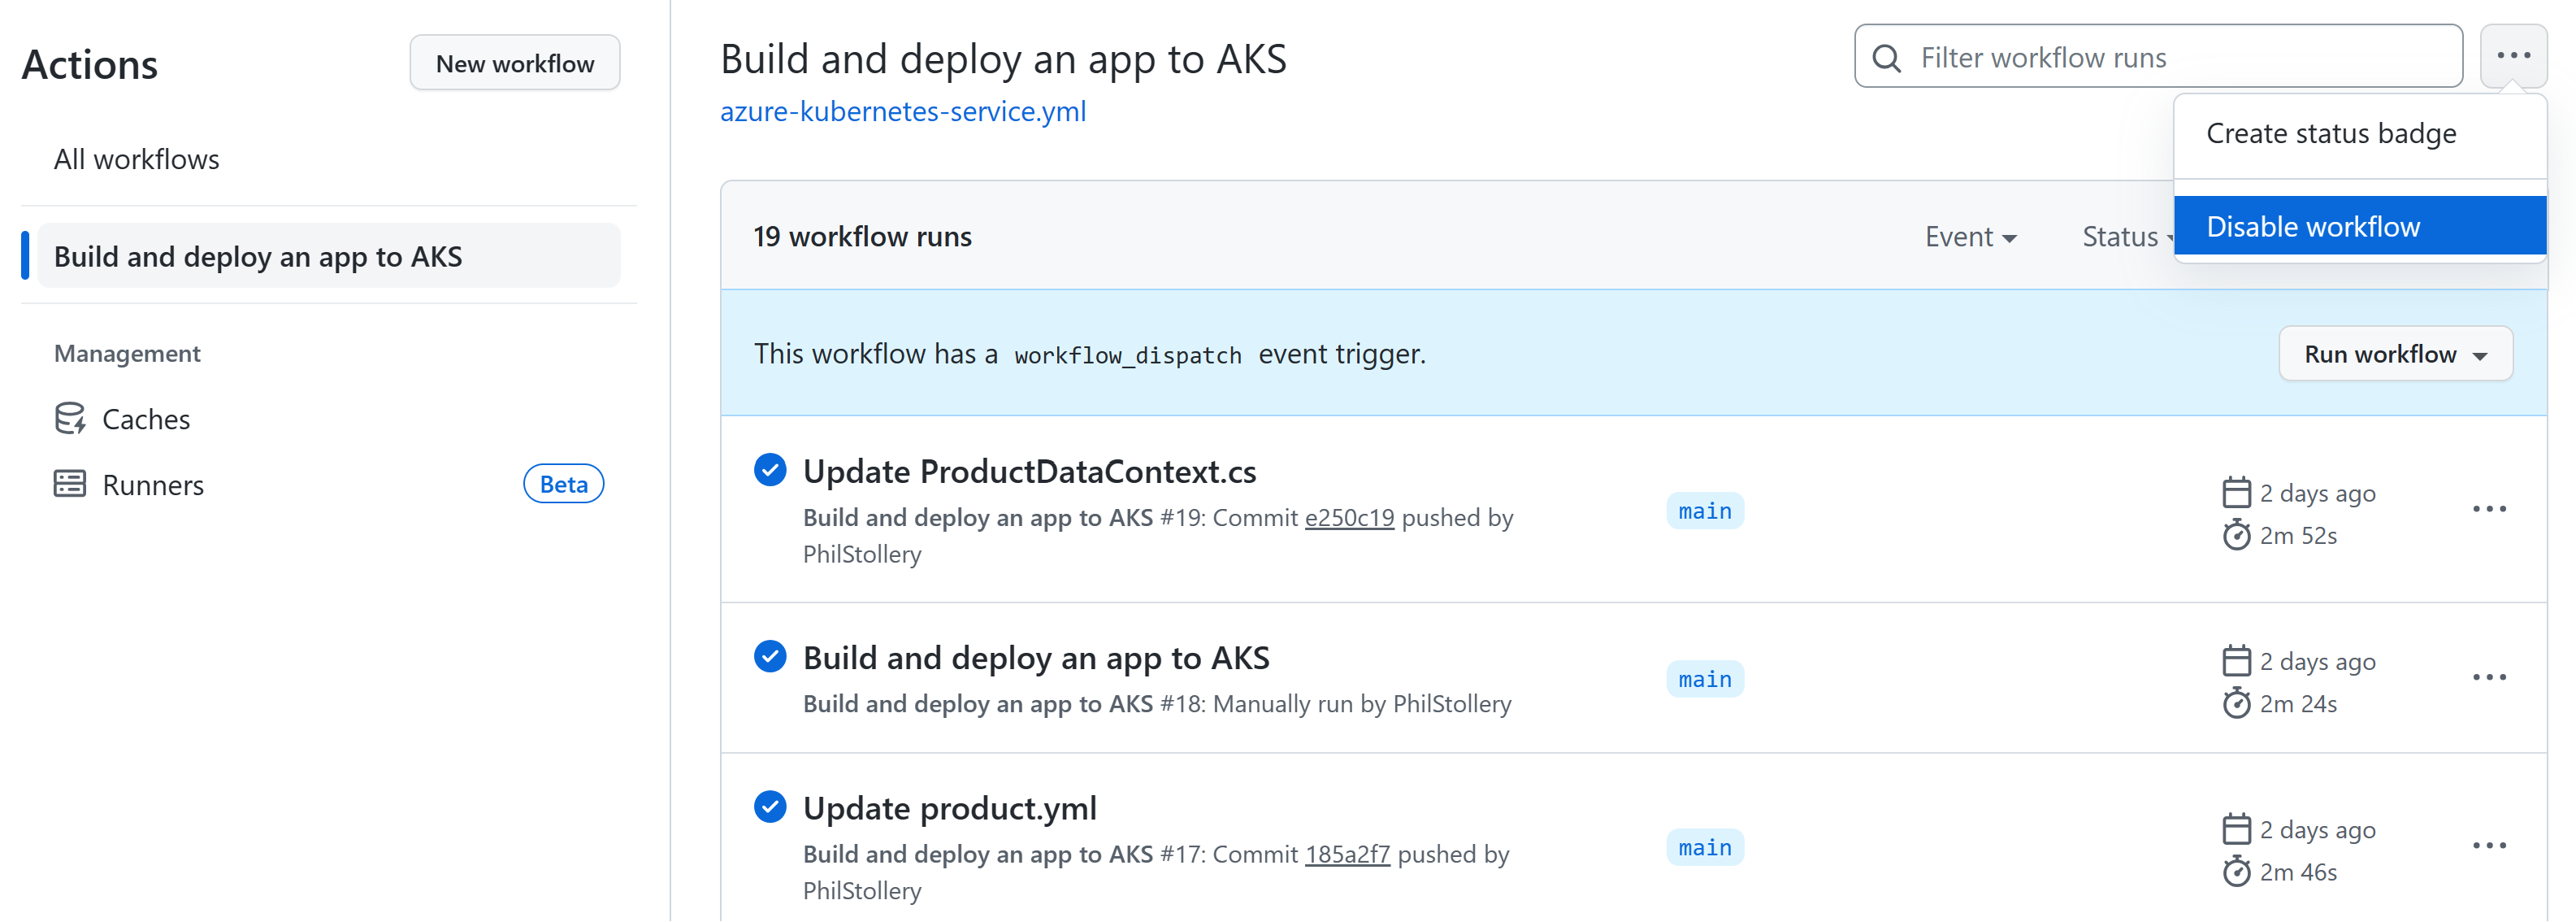 A screenshot showing the Disabled workflow menu option for a GitHub Action workflow.